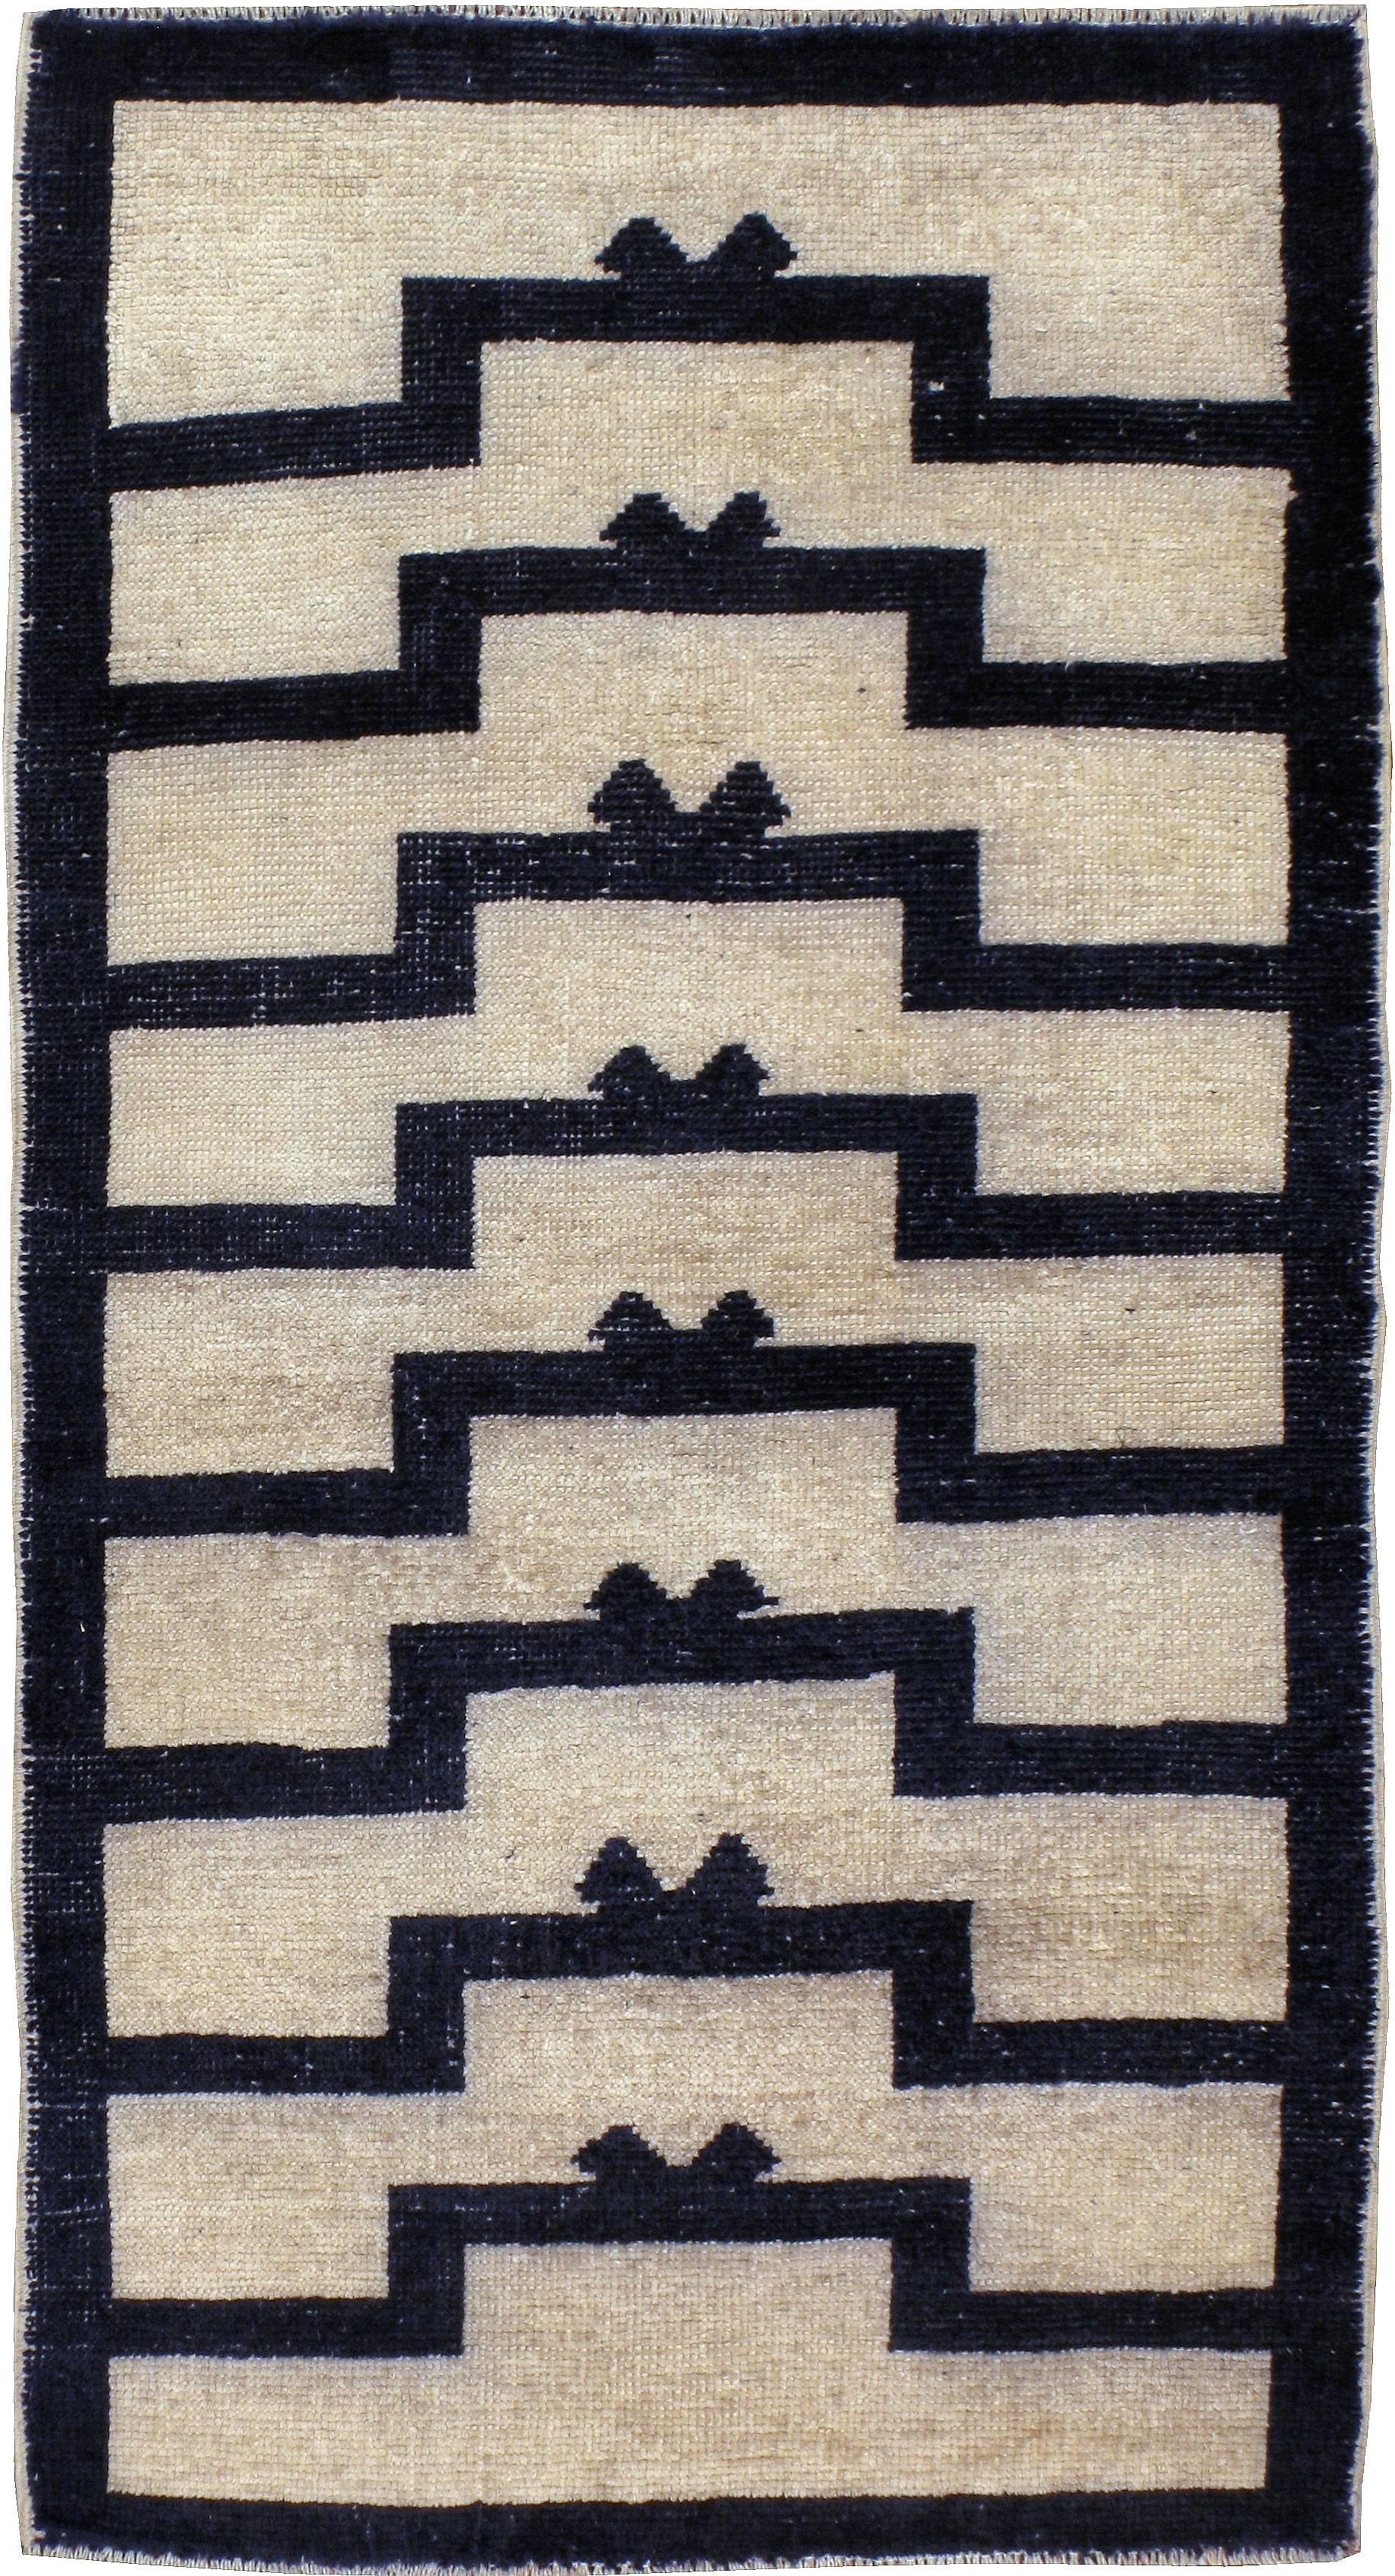 A vintage Turkish Tulu carpet from the late 20th century.